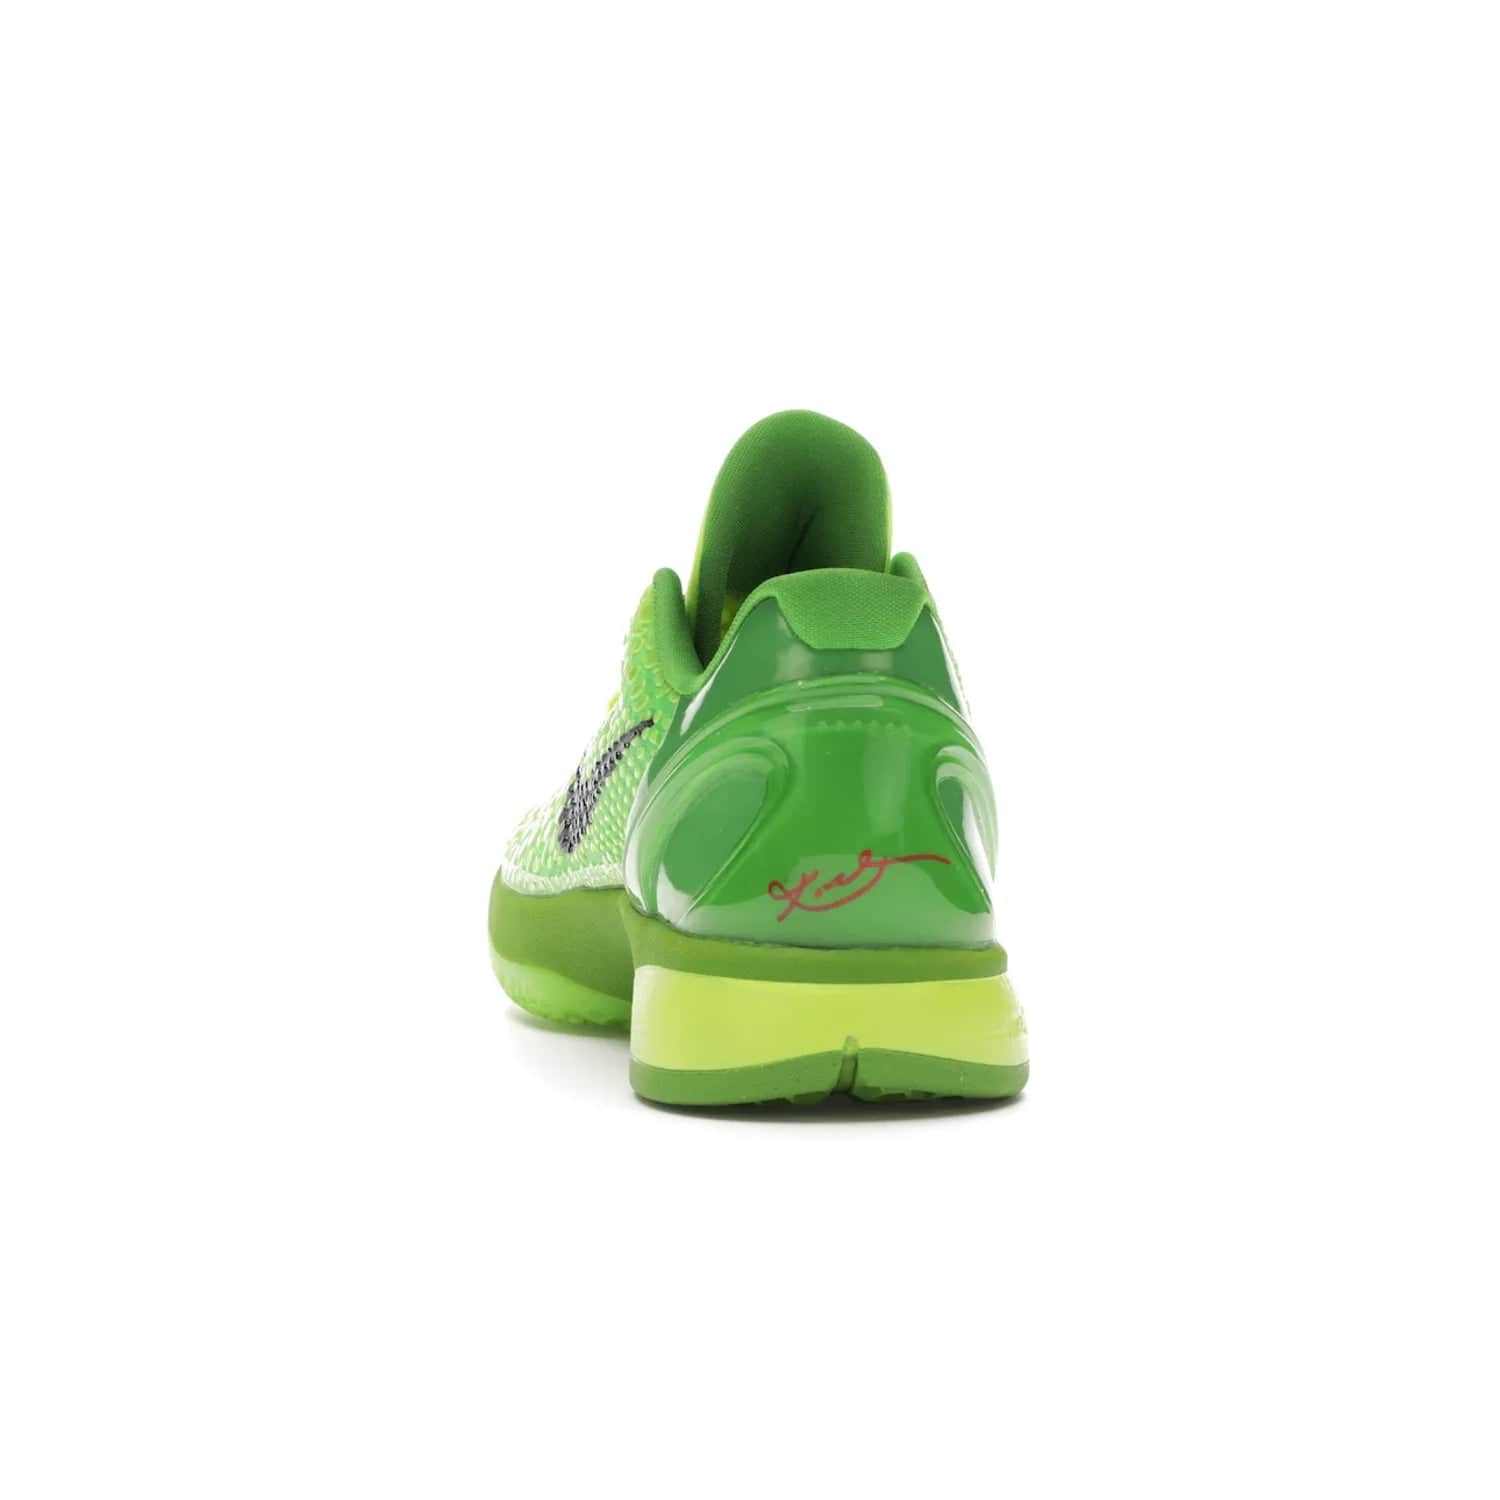 Nike Kobe 6 Protro Grinch (2020) - Image 27 - Only at www.BallersClubKickz.com - #
The Nike Kobe 6 Protro Grinch updates the iconic 2011 design with modern tech like a Zoom Air cushioning system, scaled-down traction, and updated silhouette. Experience the textured Green Apple and Volt upper plus bright red and green accents for $180.